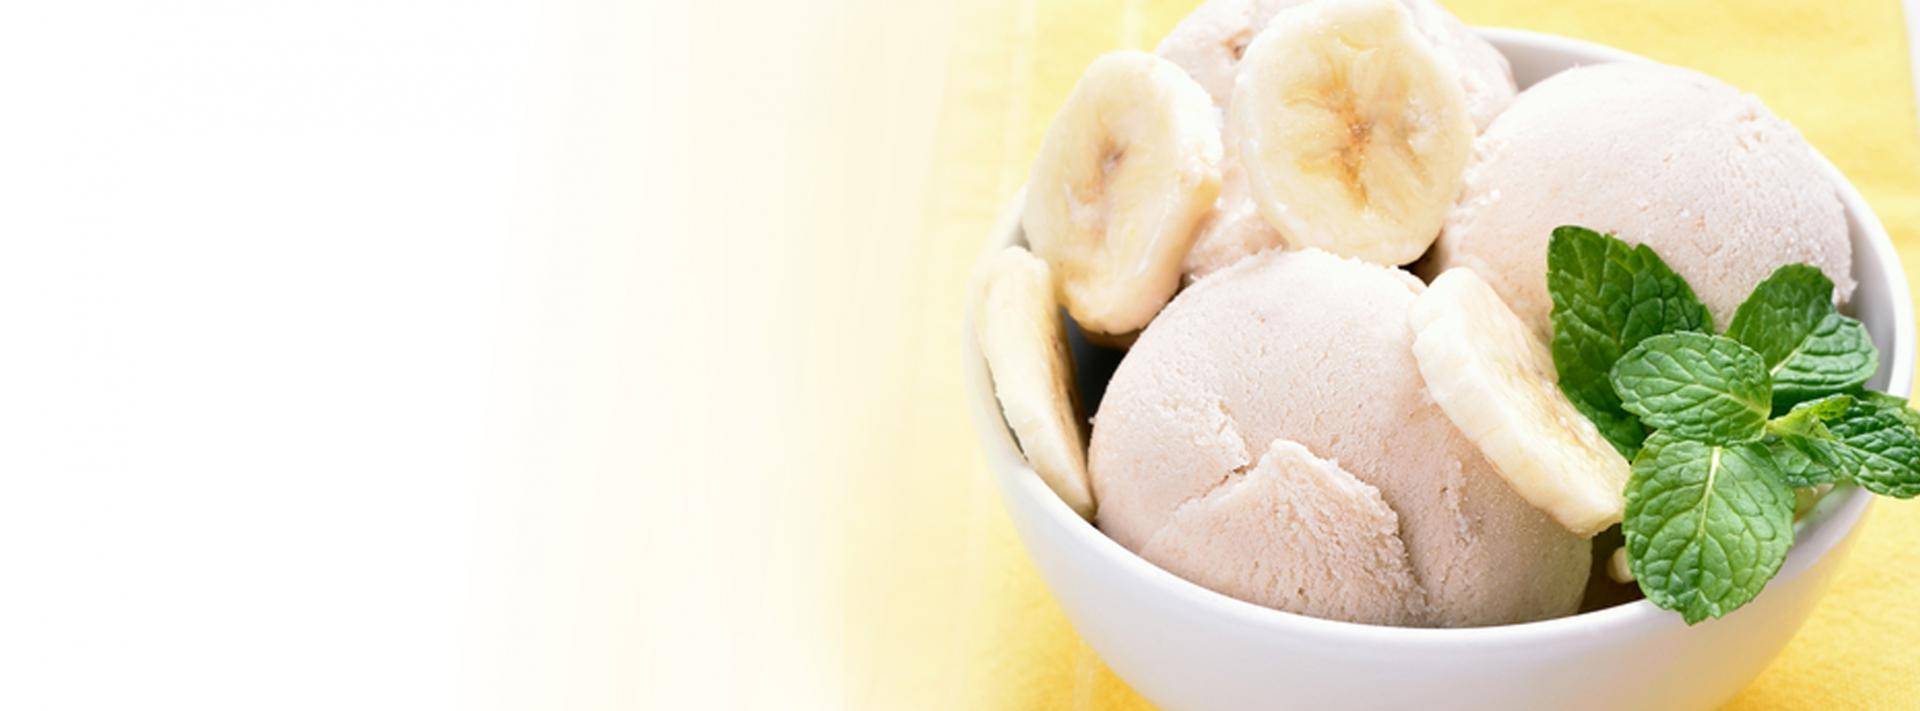 bowl of ice cream with banana slices